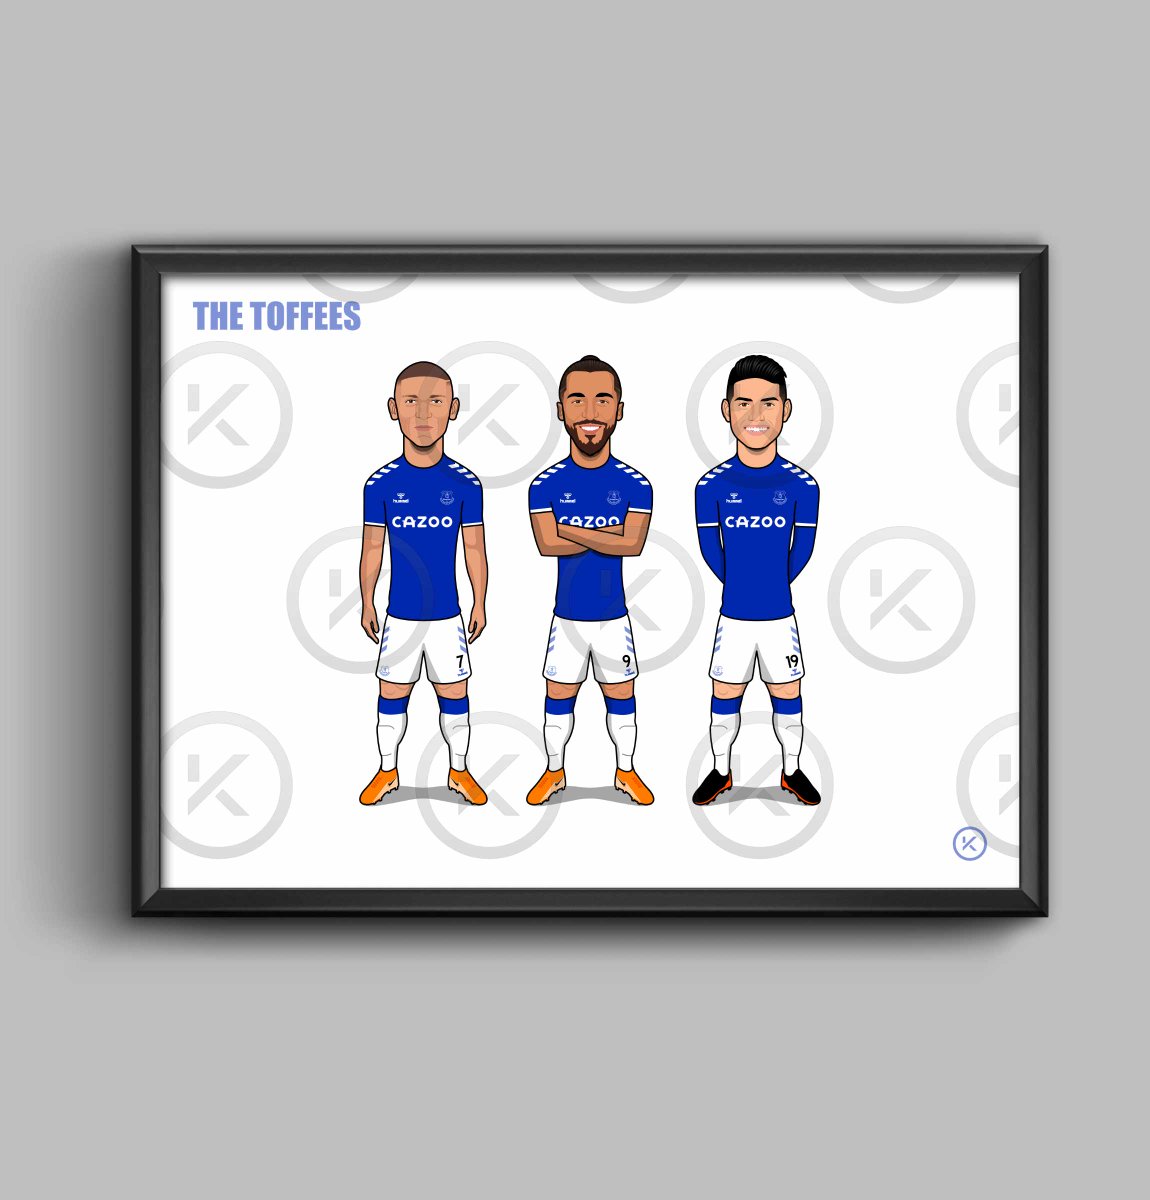 ***NEW ARTWORK*** The Toffees (Richarlison, Calvert-Lewin, James) is now available to purchase in print format. Only available at GoalStar.co.uk Pls tag an Everton fan who might like this 😃